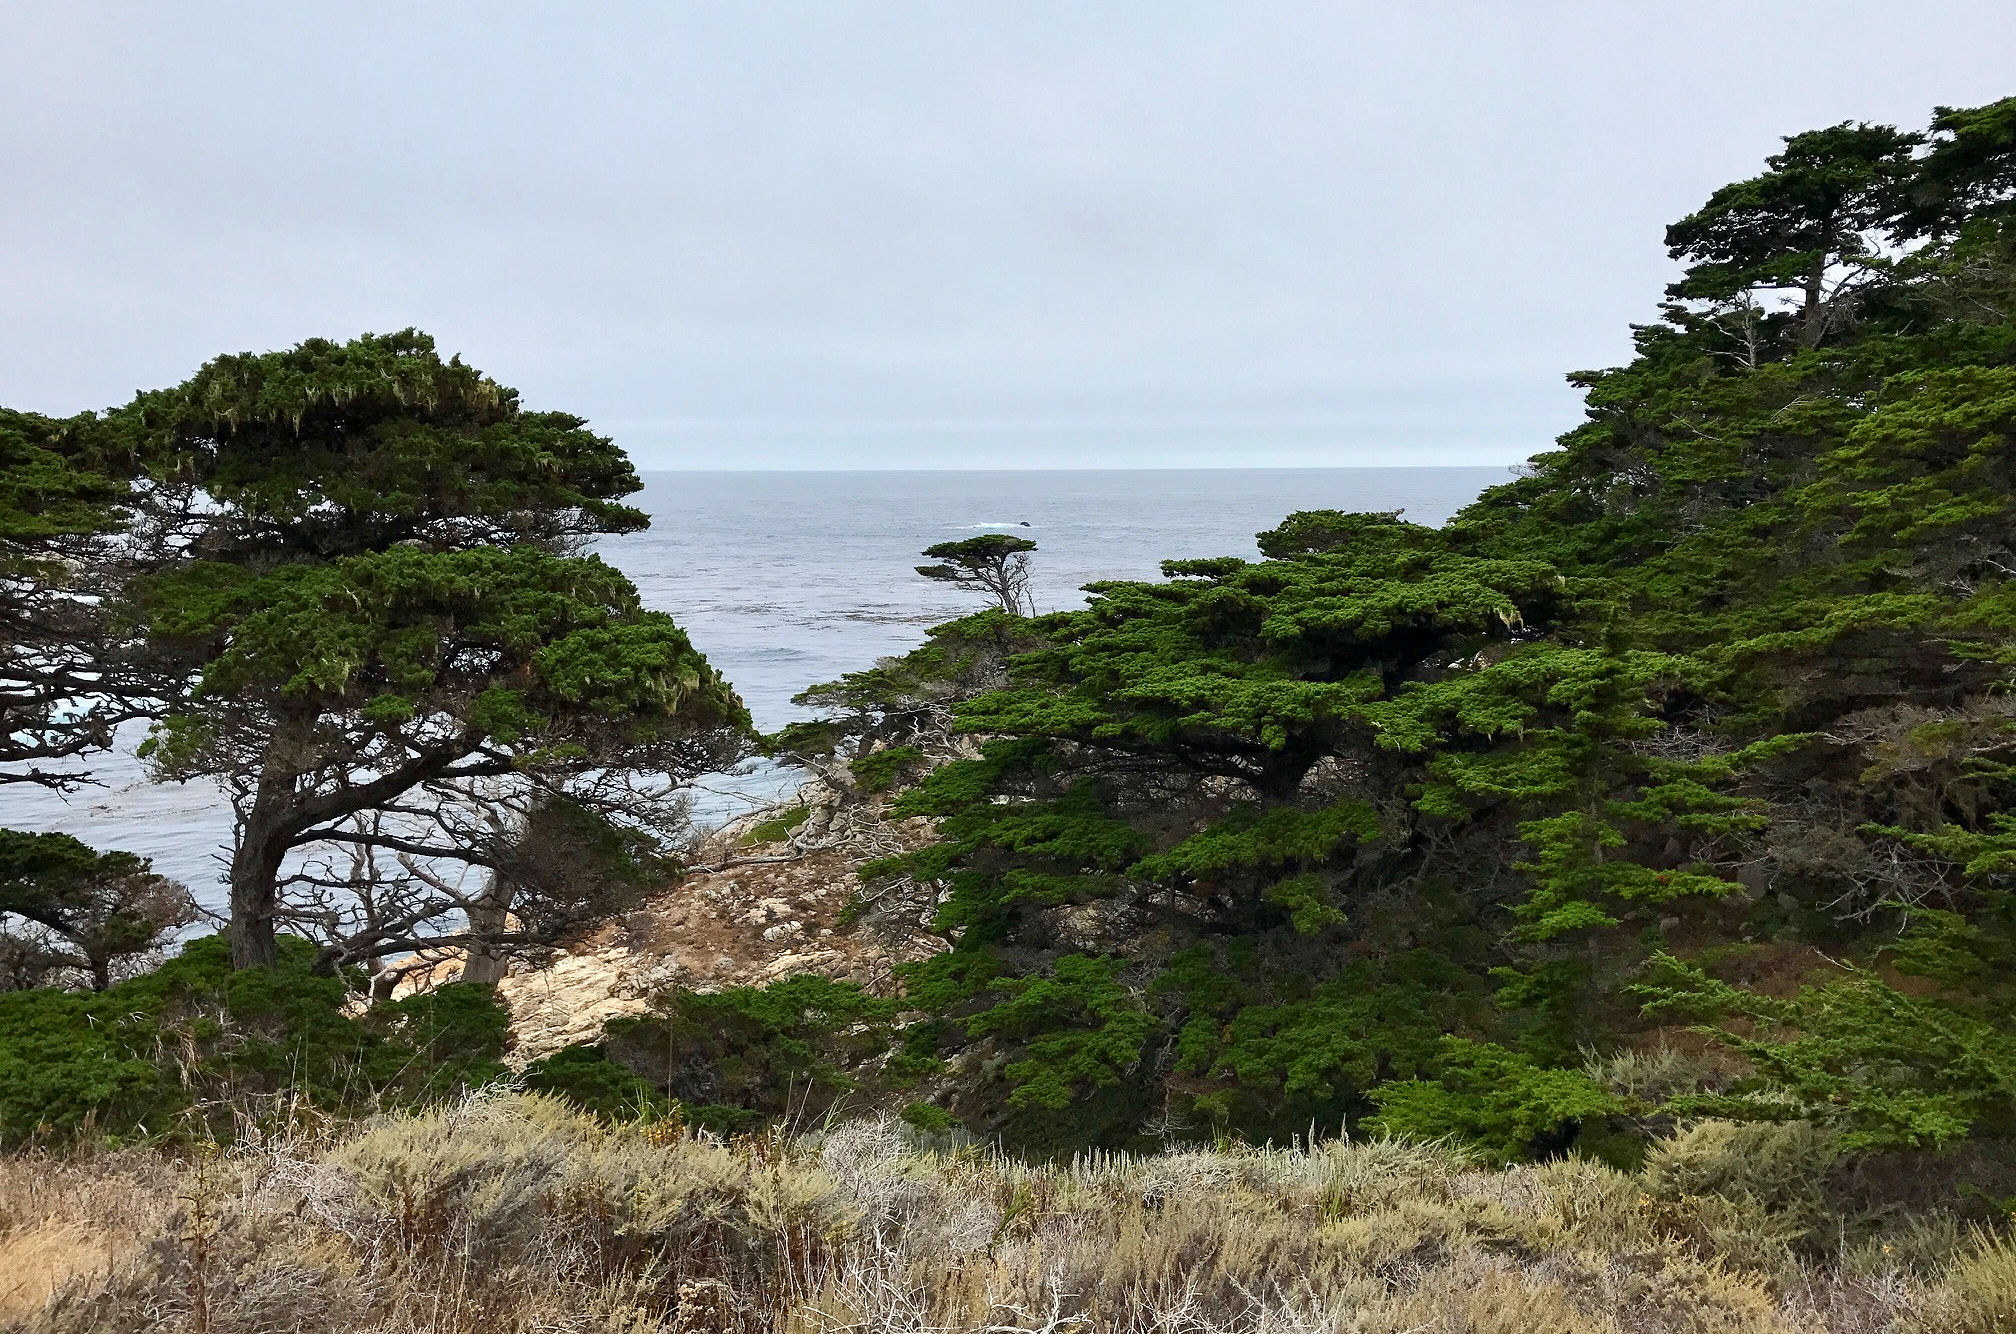 Monterey Cypress trees at Point Lobos State Reserve on the Central California Coast